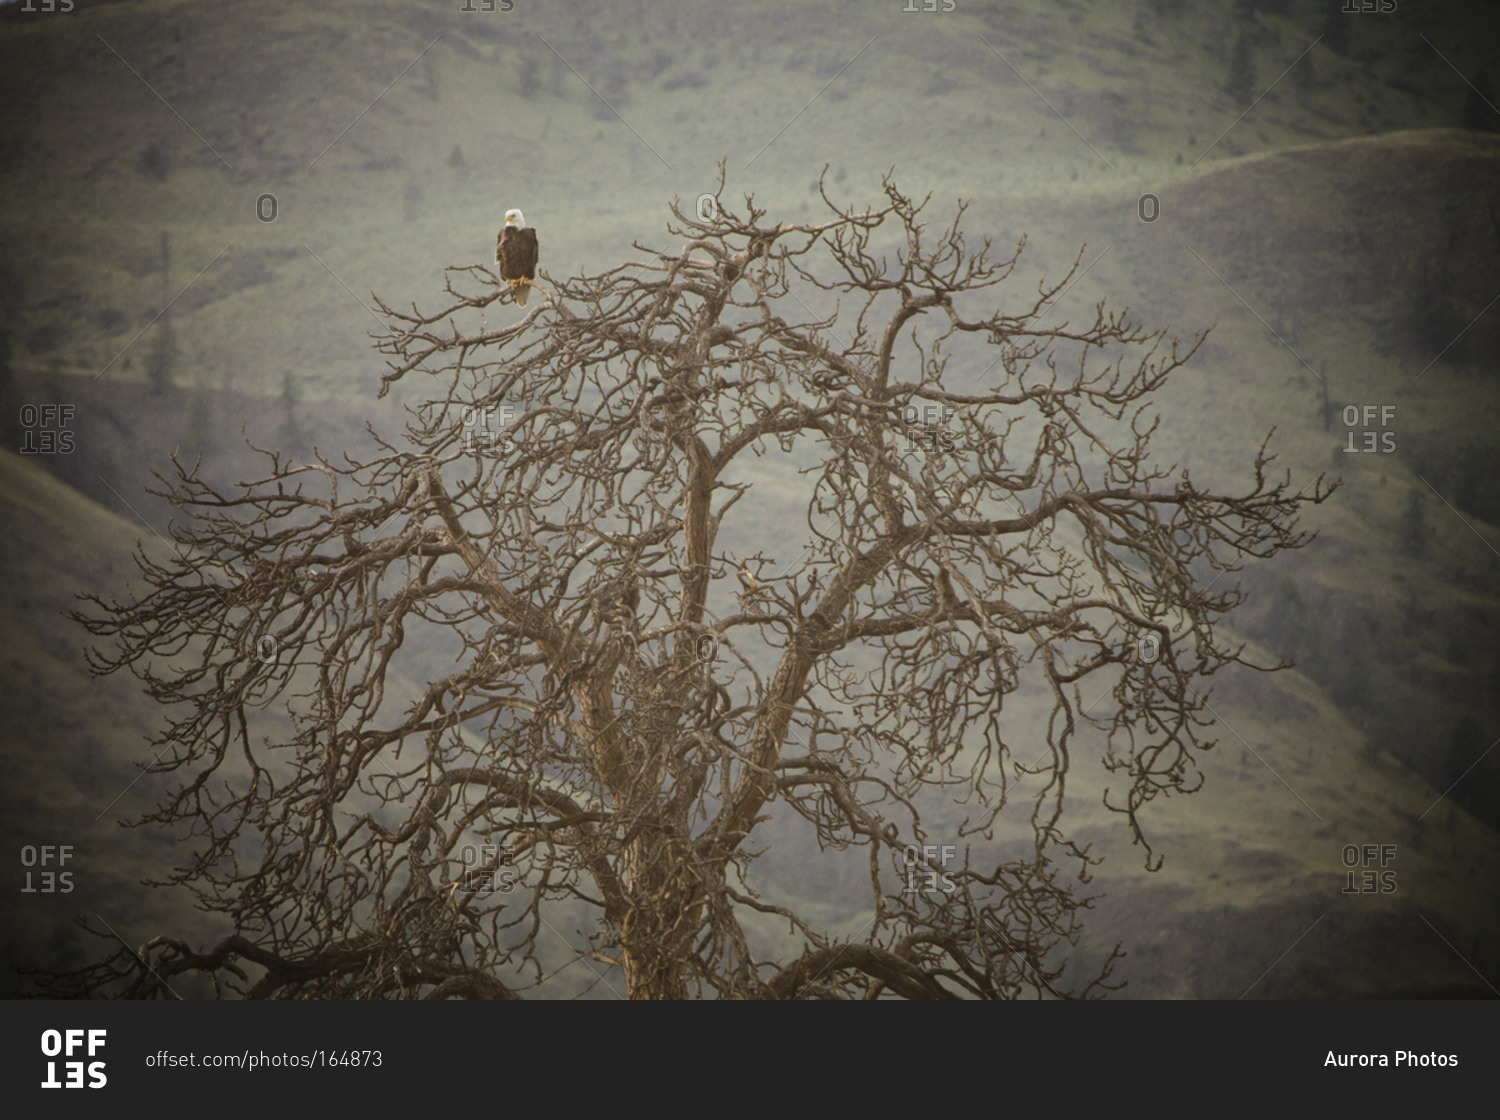 A Bald Eagle sits on a gnarly old Ponderosa Pine Tree on the shore of Kamloops Lake, British Columbia, Canada